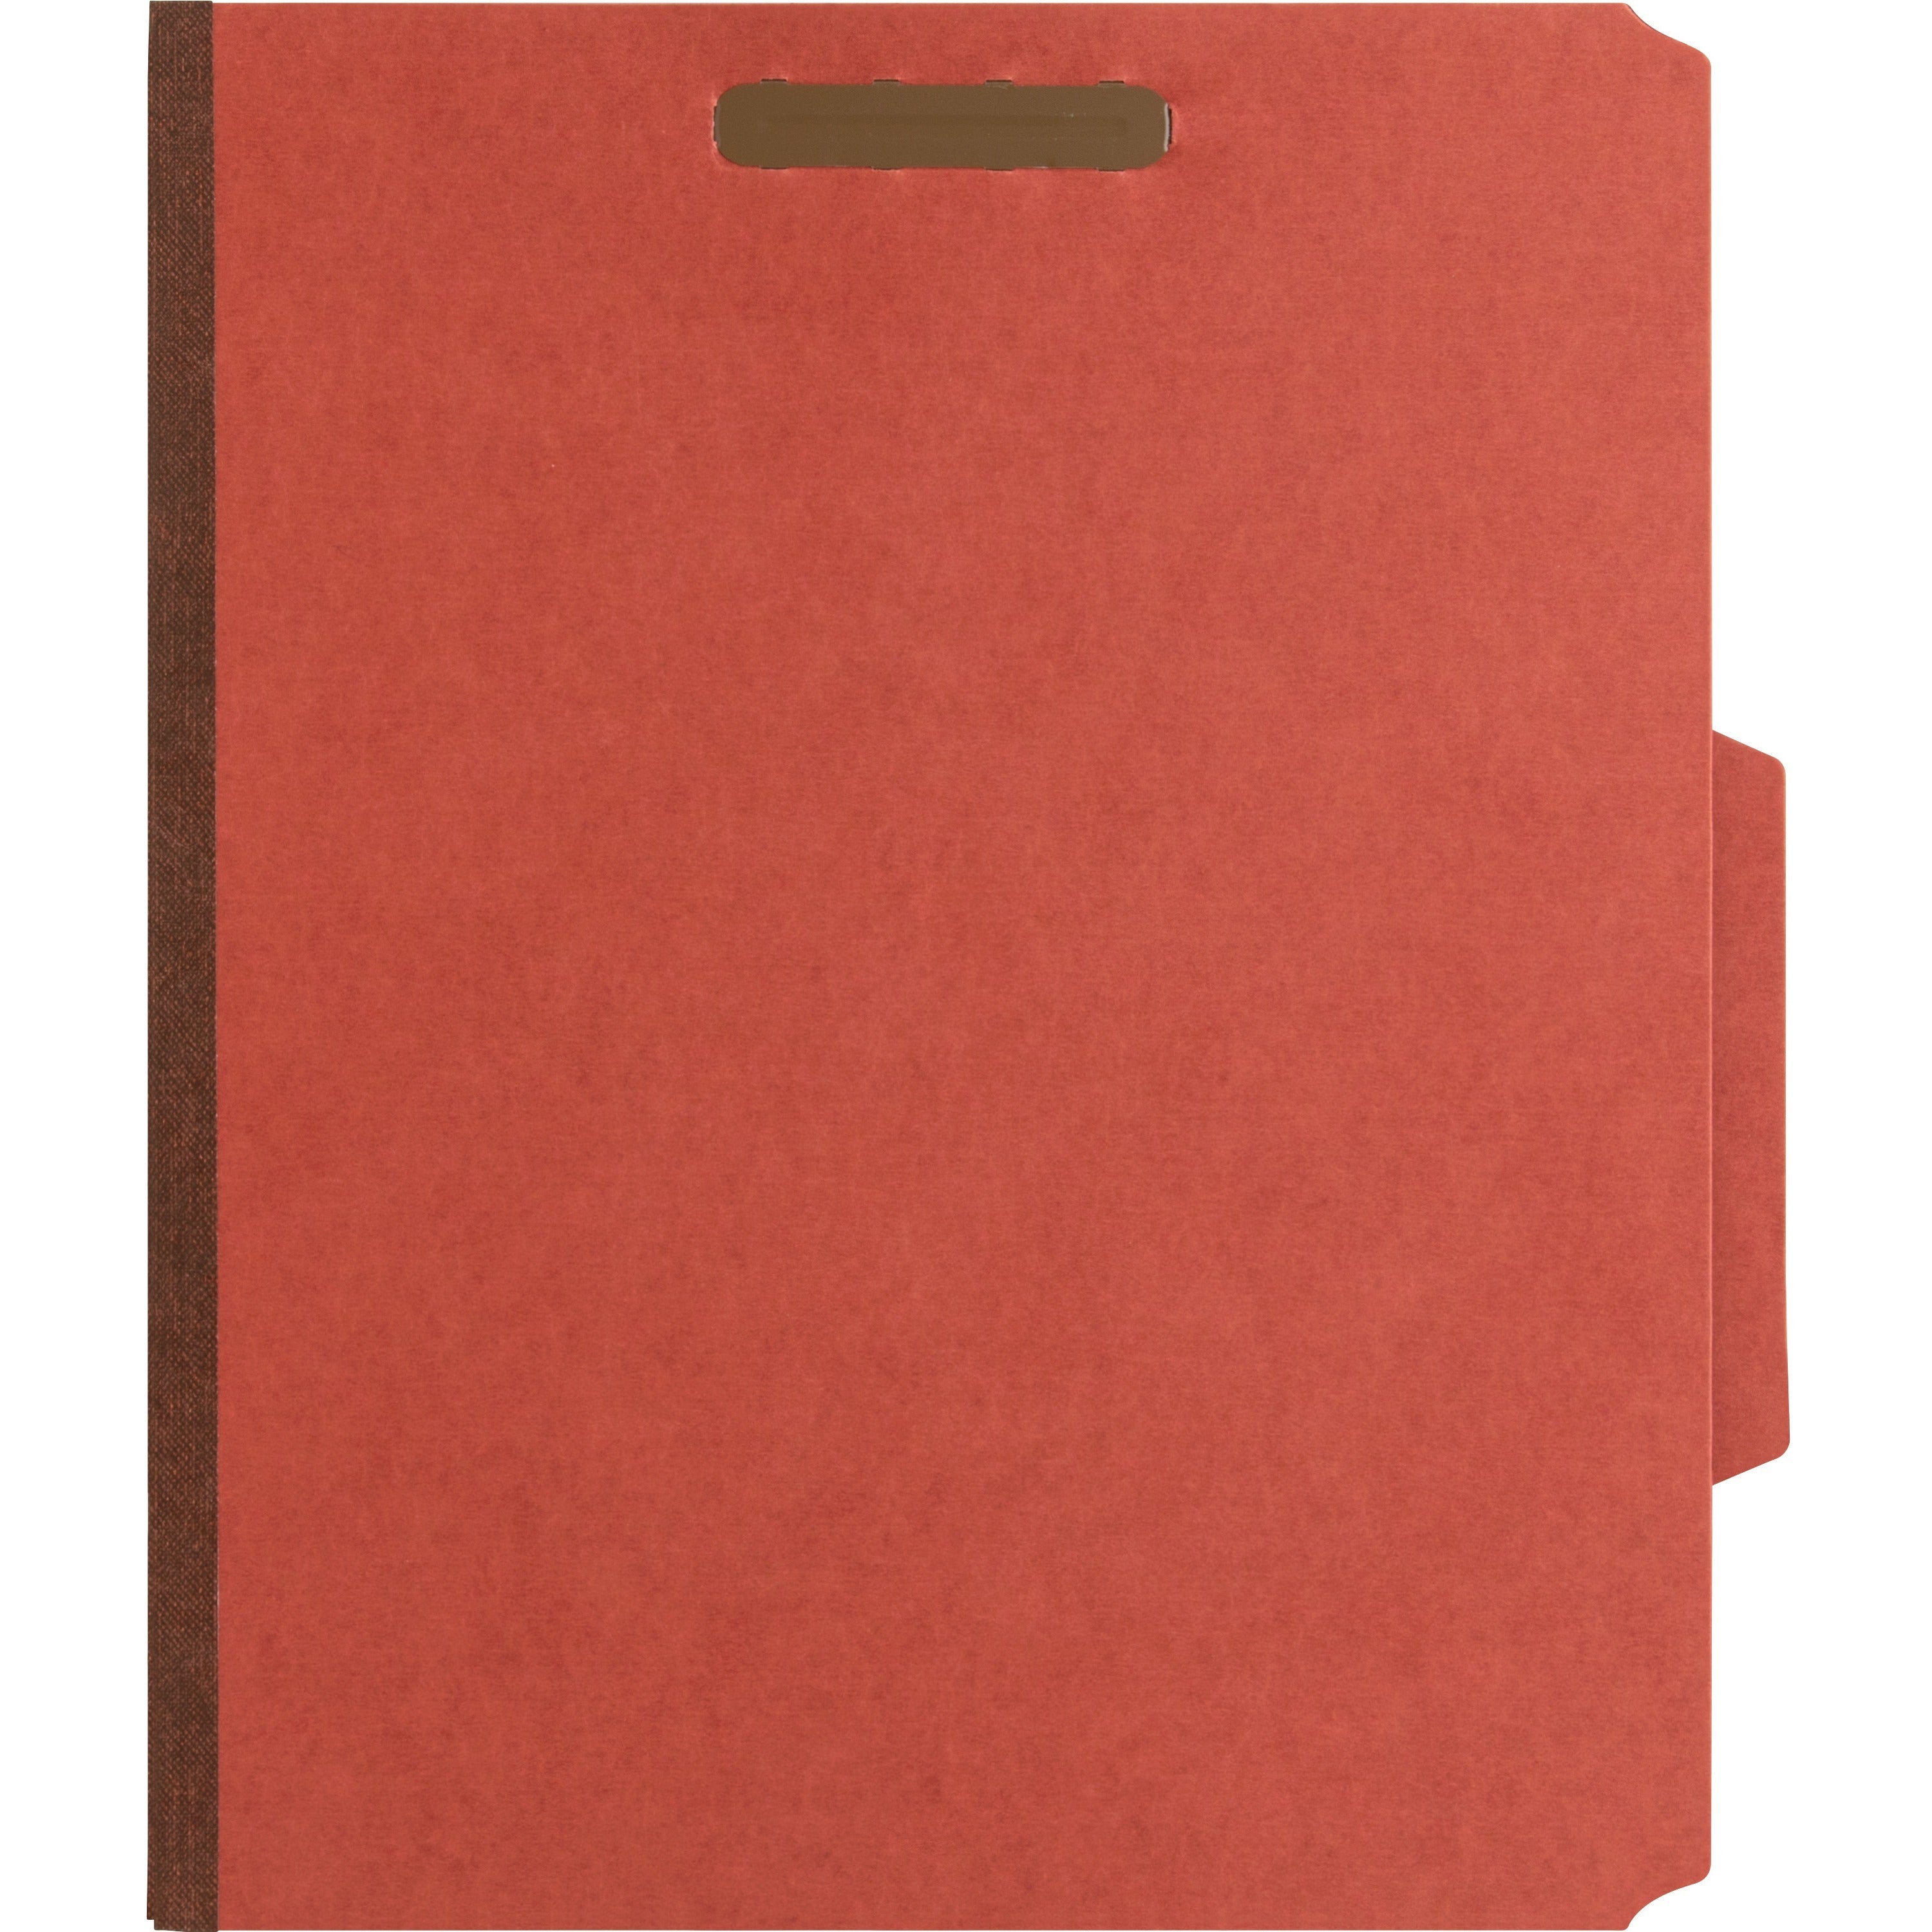 Nature Saver 2/5 Tab Cut Letter Recycled Classification Folder - 8 1/2" x 11" - 6 Fastener(s) - 2" Fastener Capacity for Folder, 1" Fastener Capacity for Divider - 2 Divider(s) - Pressboard - Red - 100% Recycled - 10 / Box - 